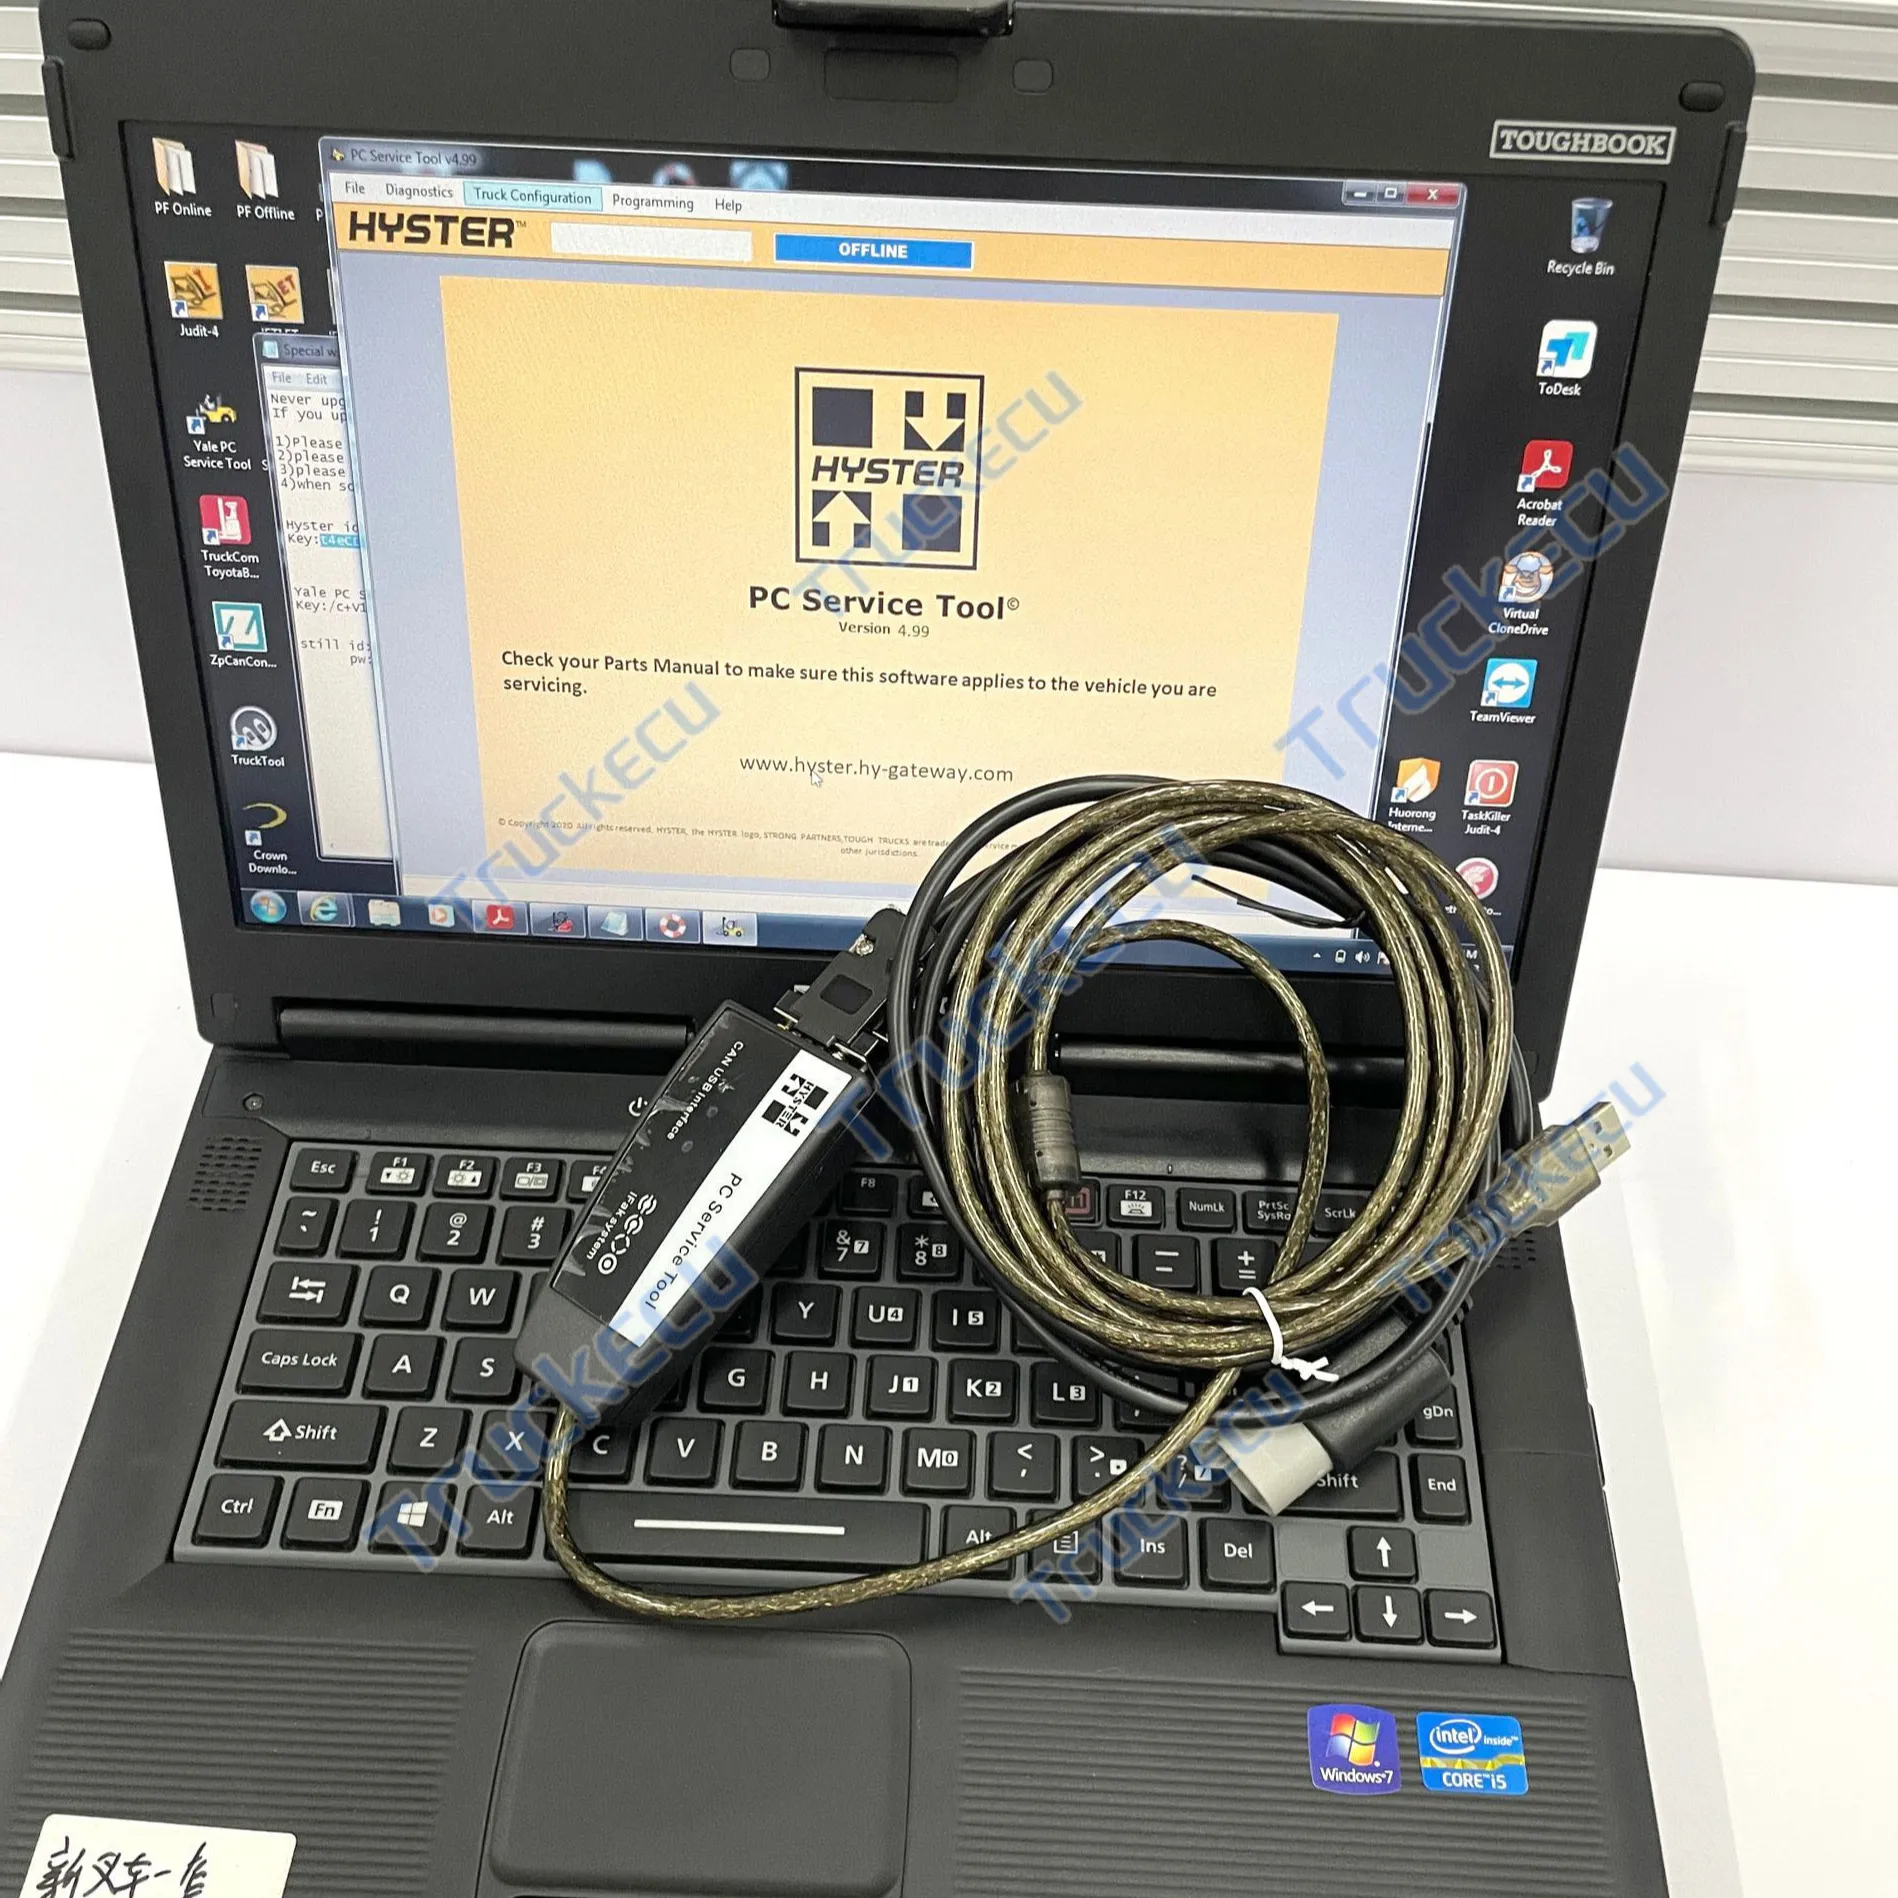 CF53 LAPTOP For hyster yale forklift Yale PC Service Tool Ifak Forklift Diagnostic Interface